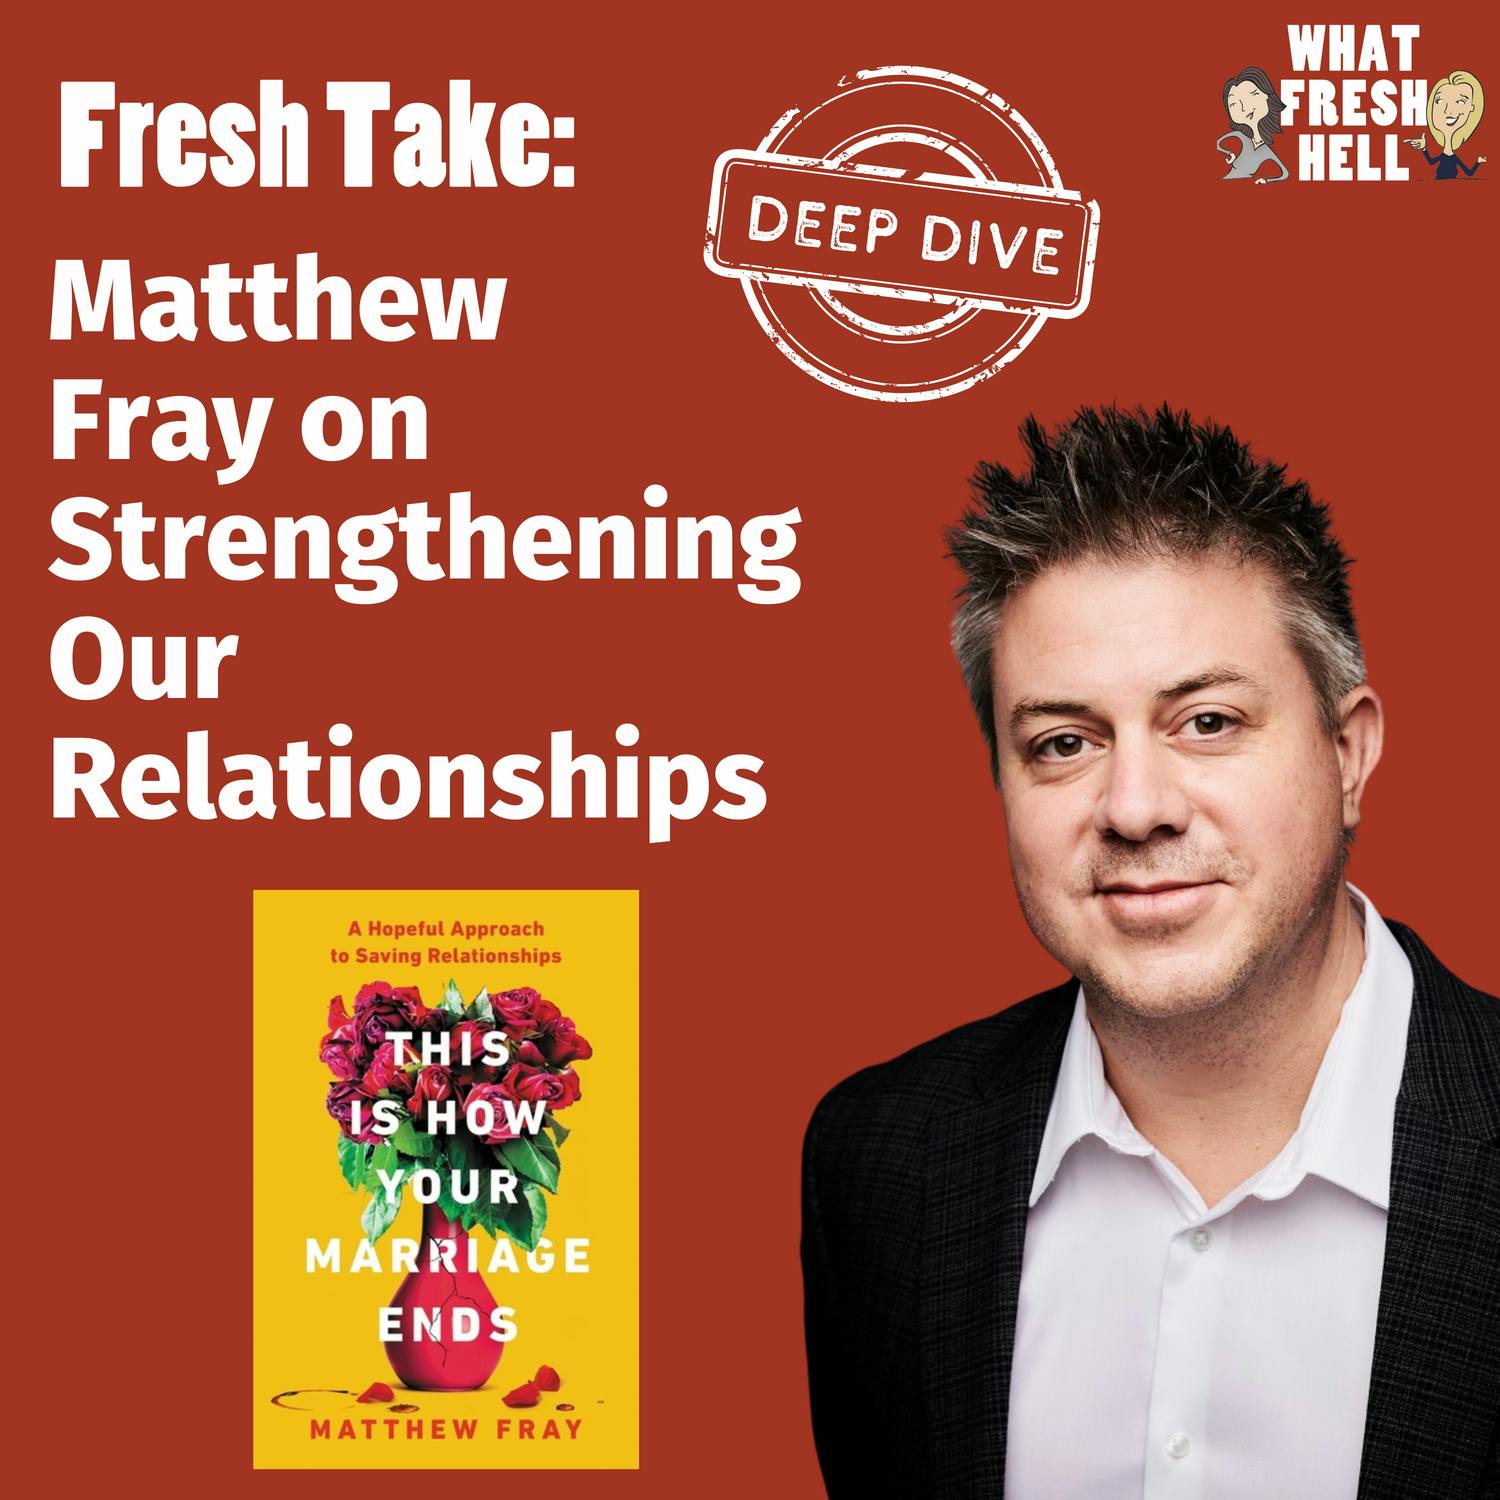 DEEP DIVE: Matthew Fray on Strengthening Our Relationships